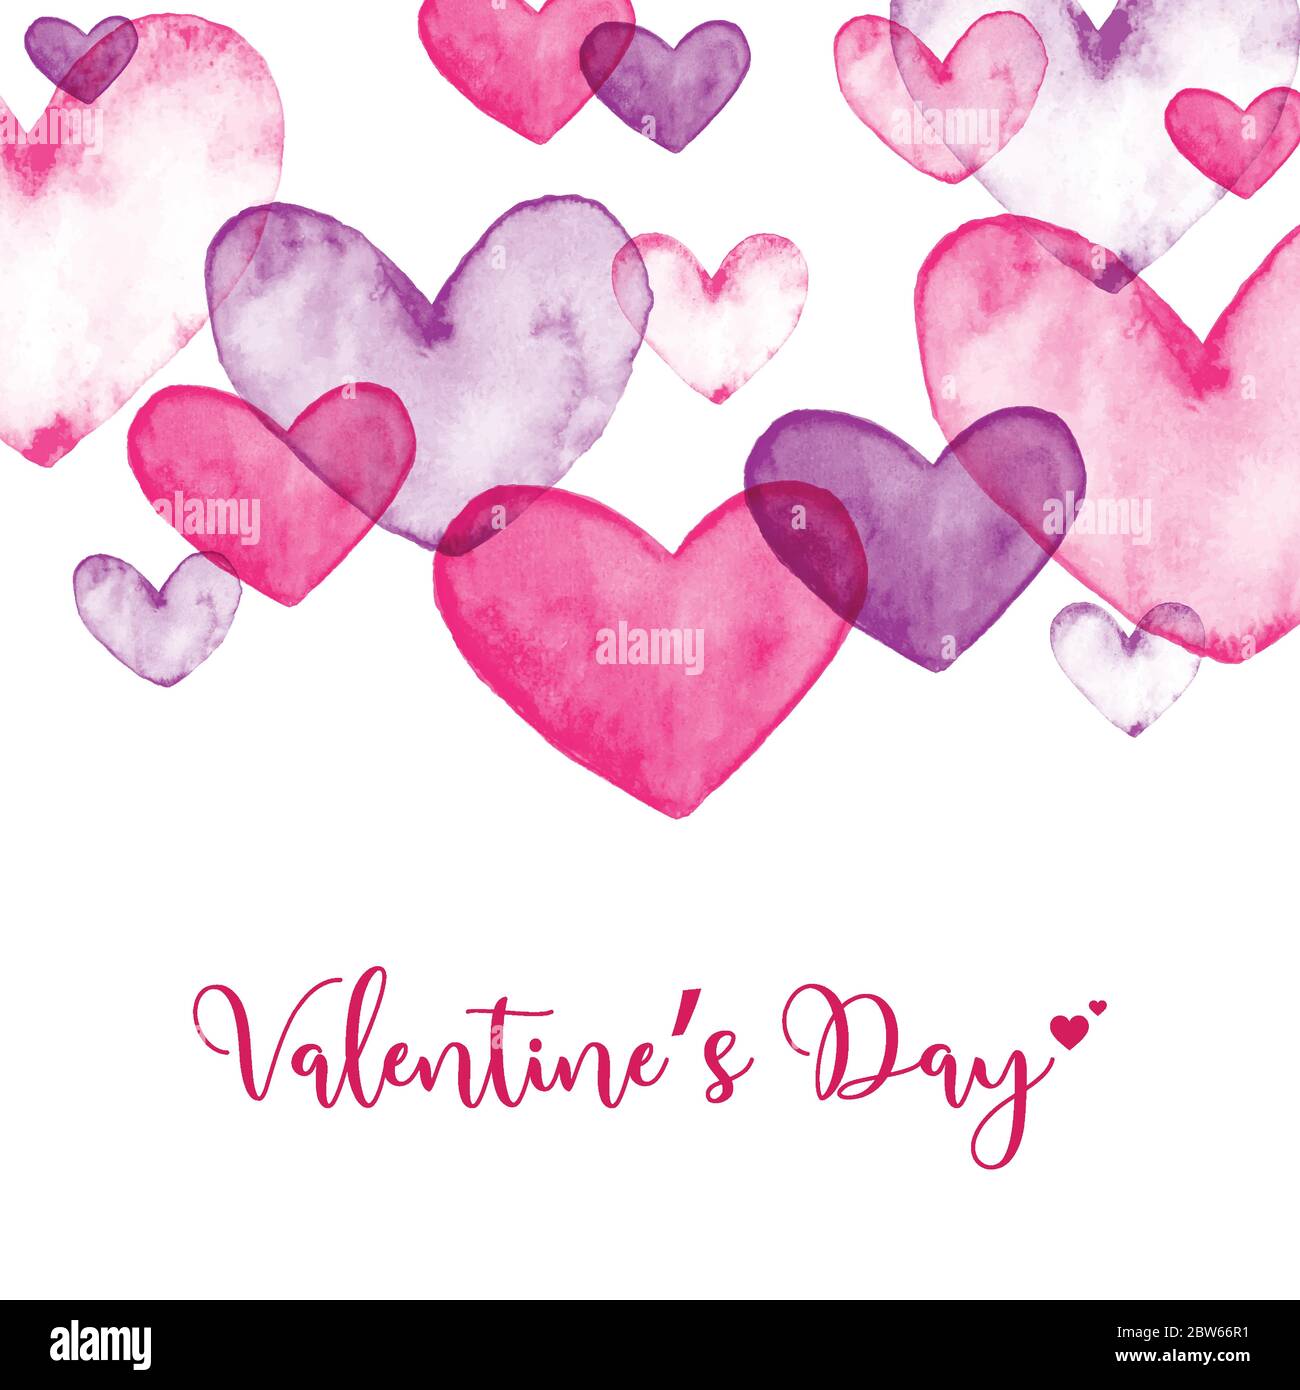 DIY cards Watercolor love hearts Valentines Day clipart Hand painted hearts 16 Hand-painted Watercolor Hearts